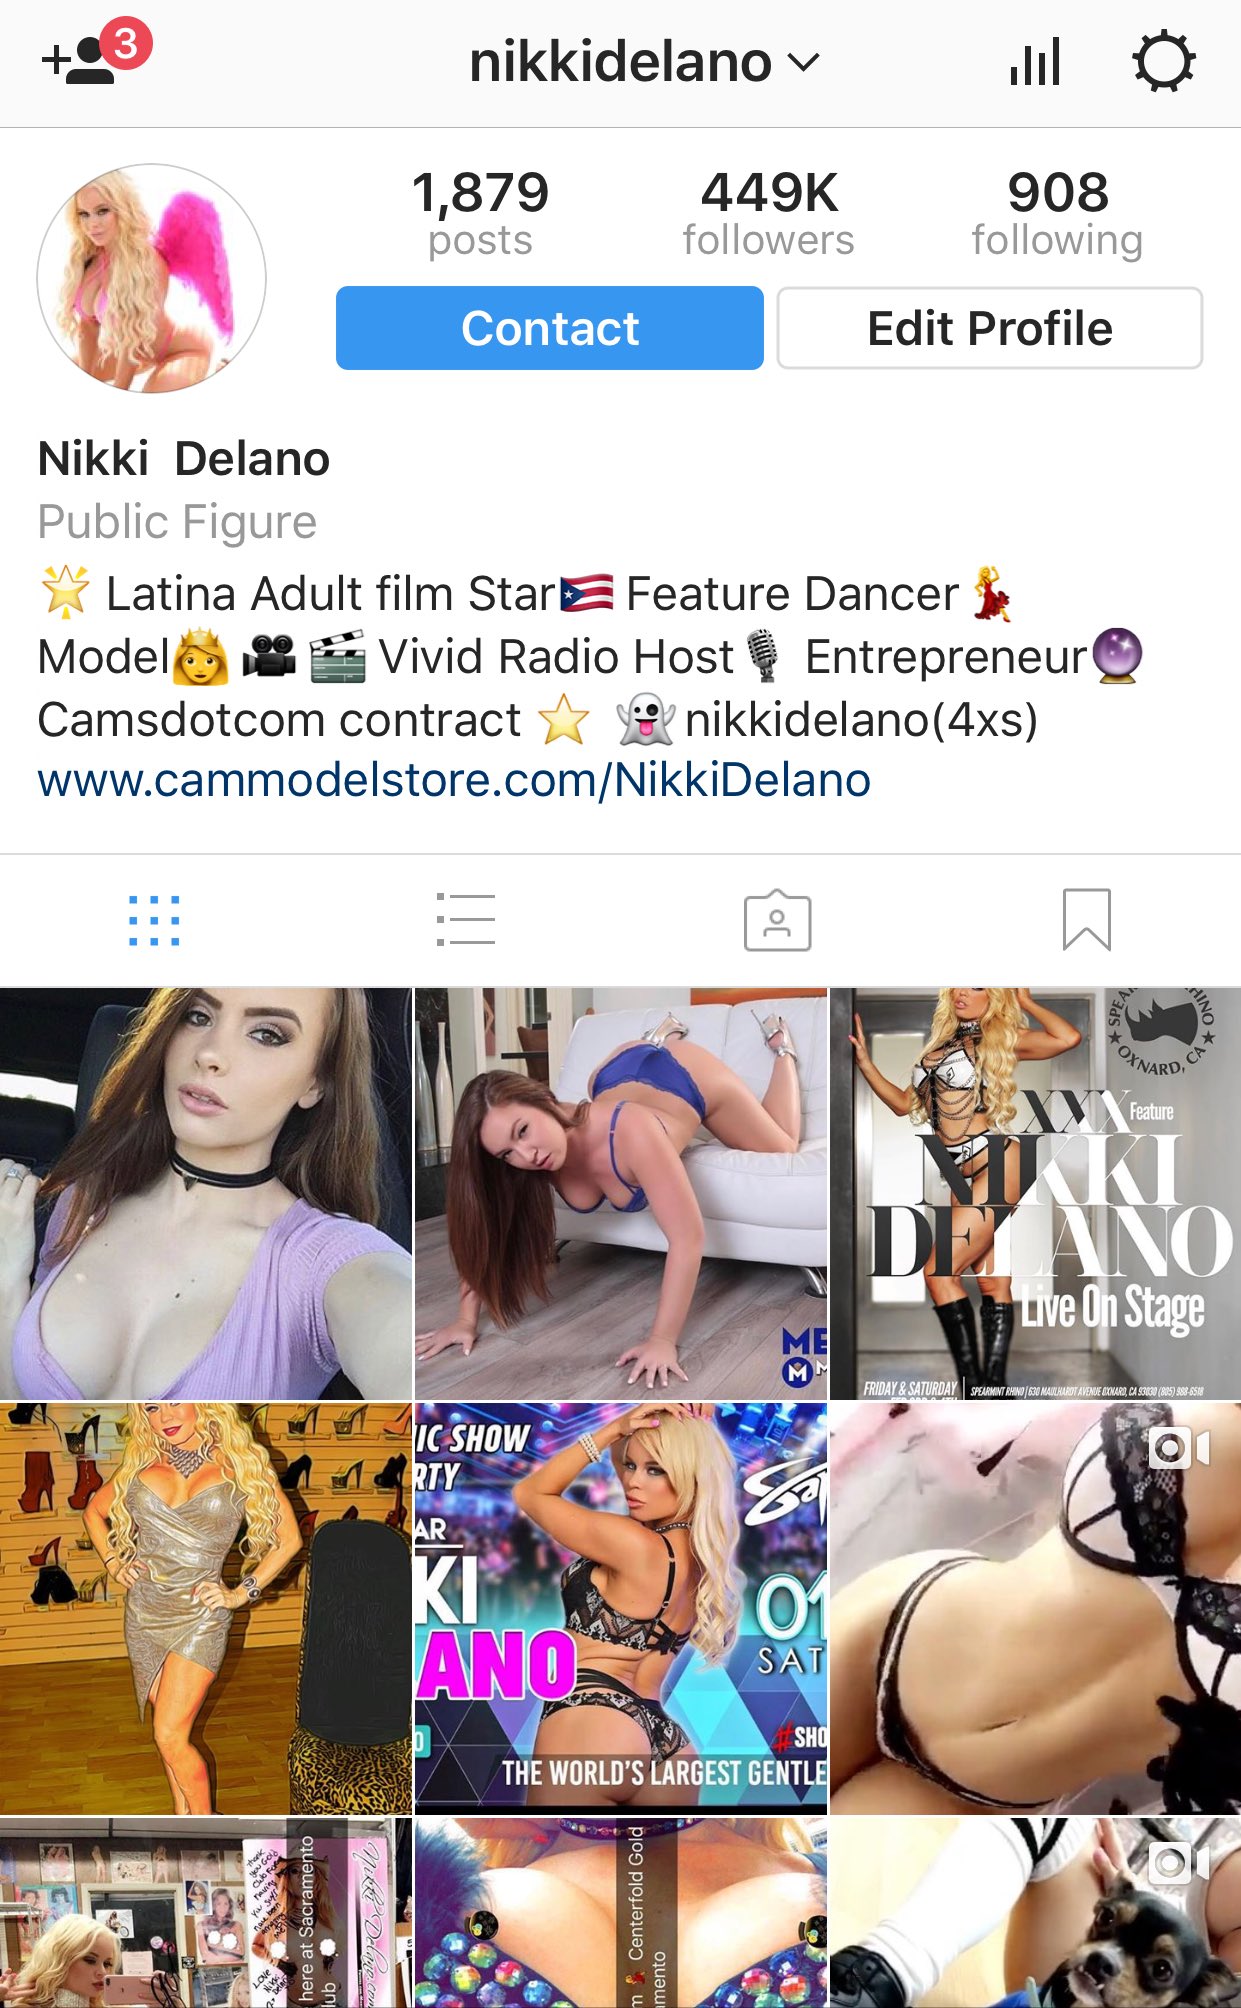 Check out my instagram you can follow me babe at @NikkiDelano https://t.co/NuFLuHosRc